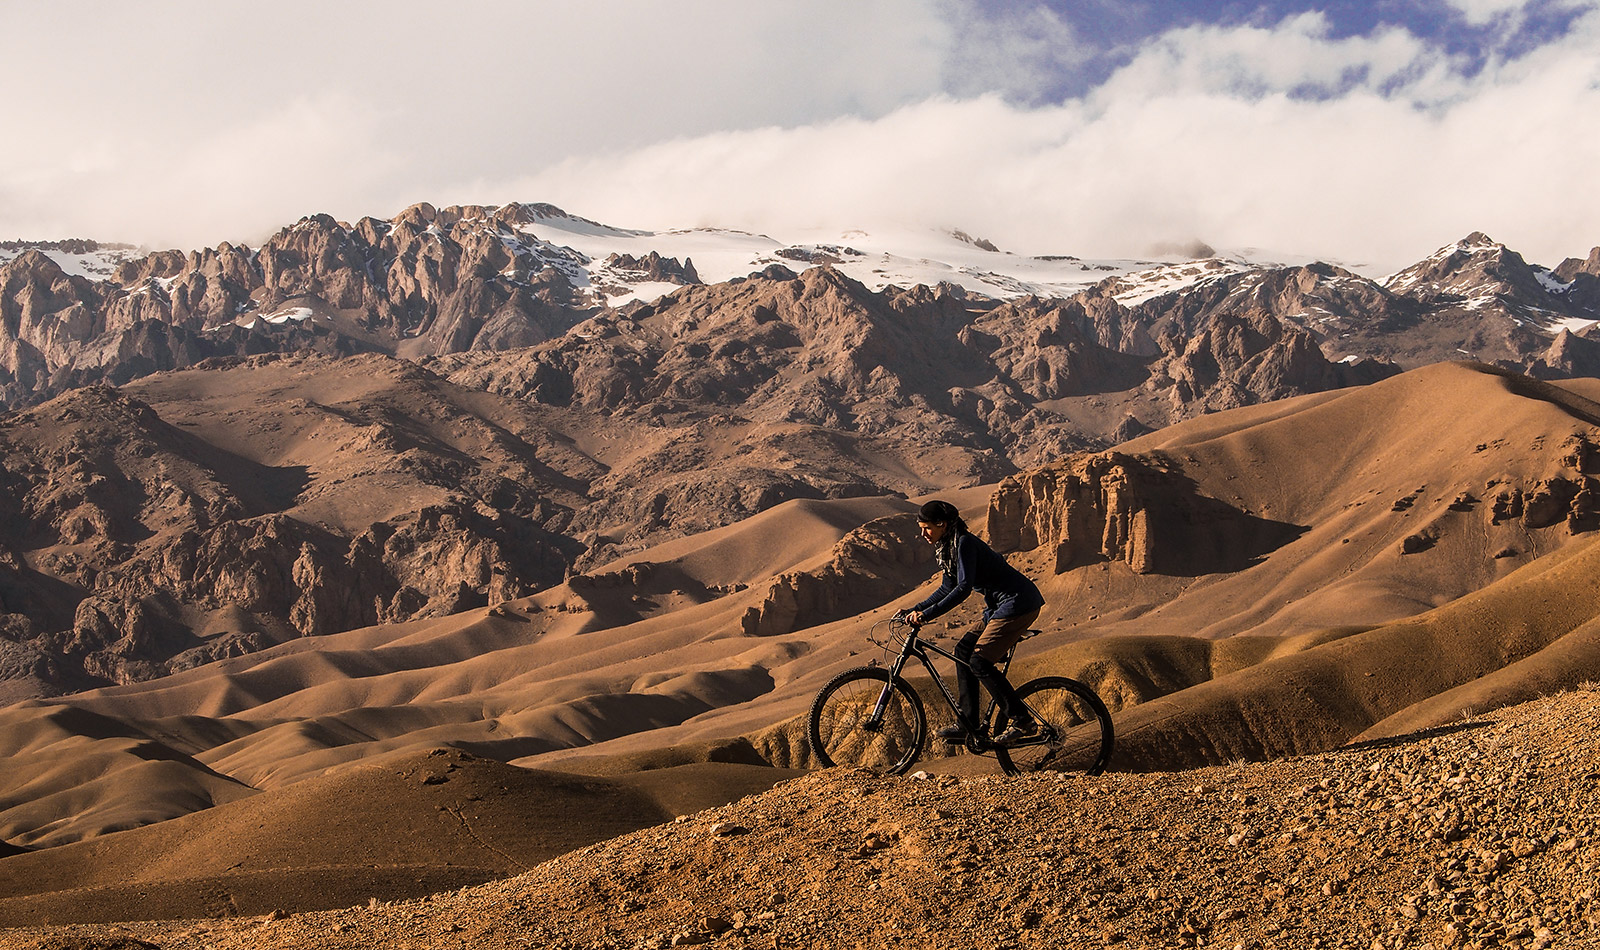 Shannon Galpin – Cycling in Afghanistan